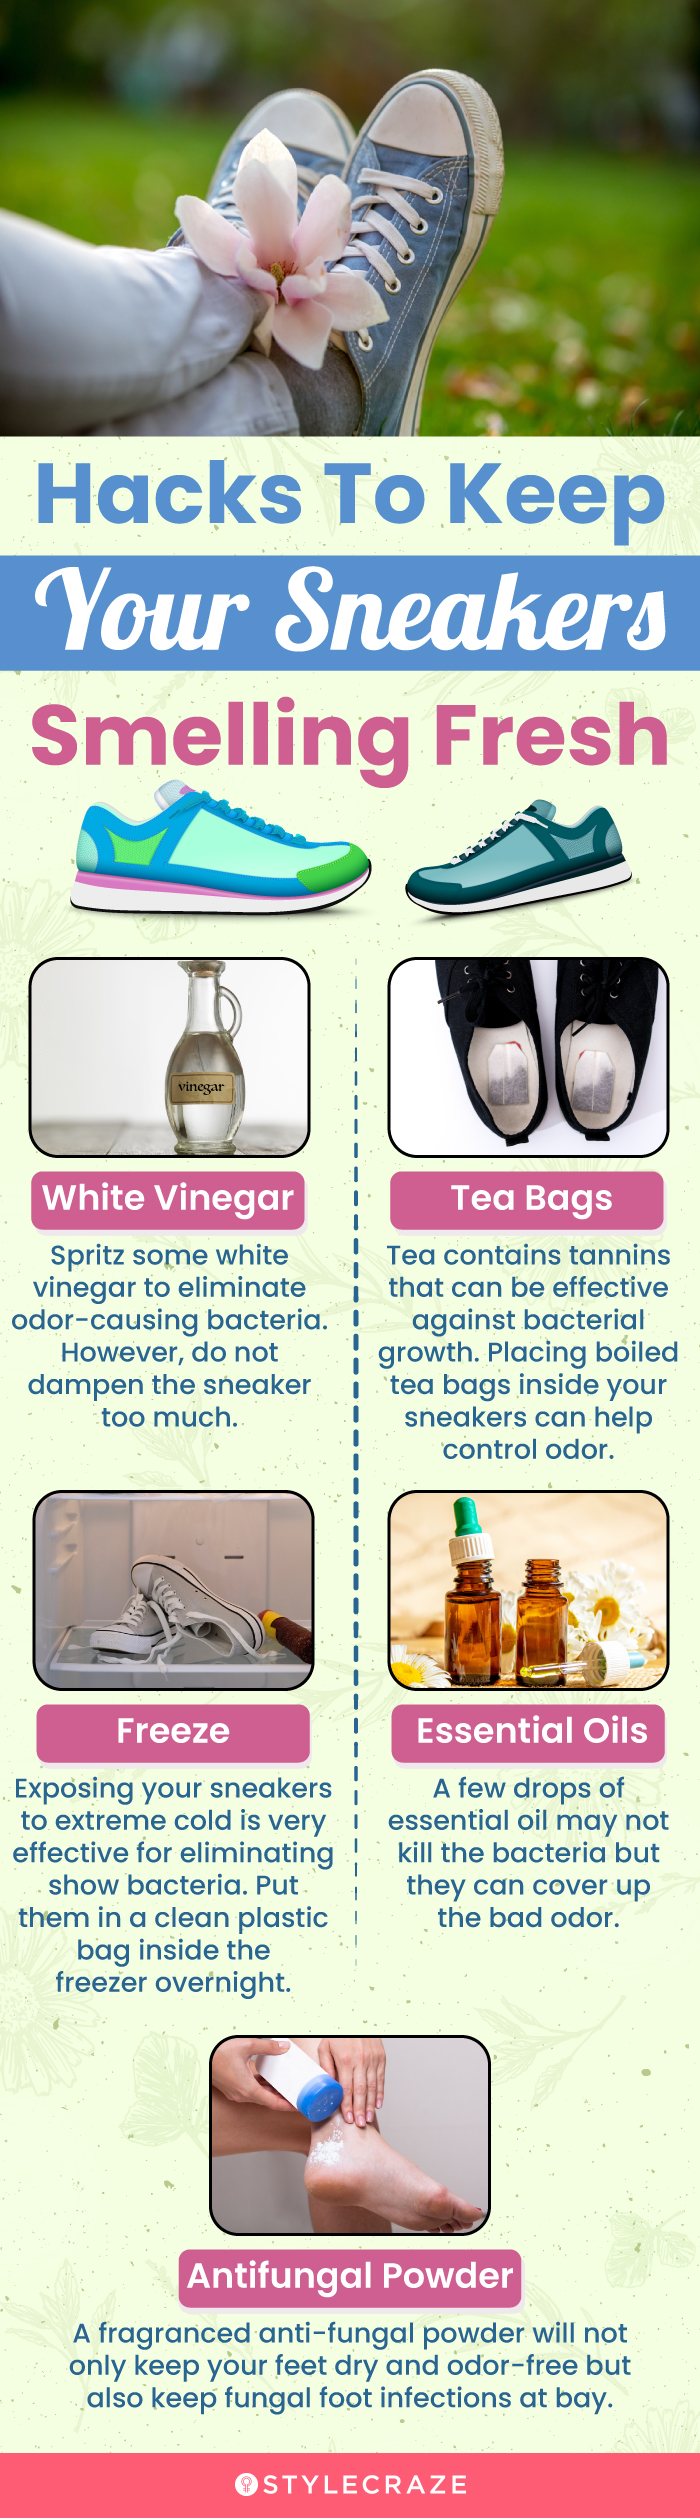 Hacks To Keep Your Sneakers Smelling Fresh (infographic)